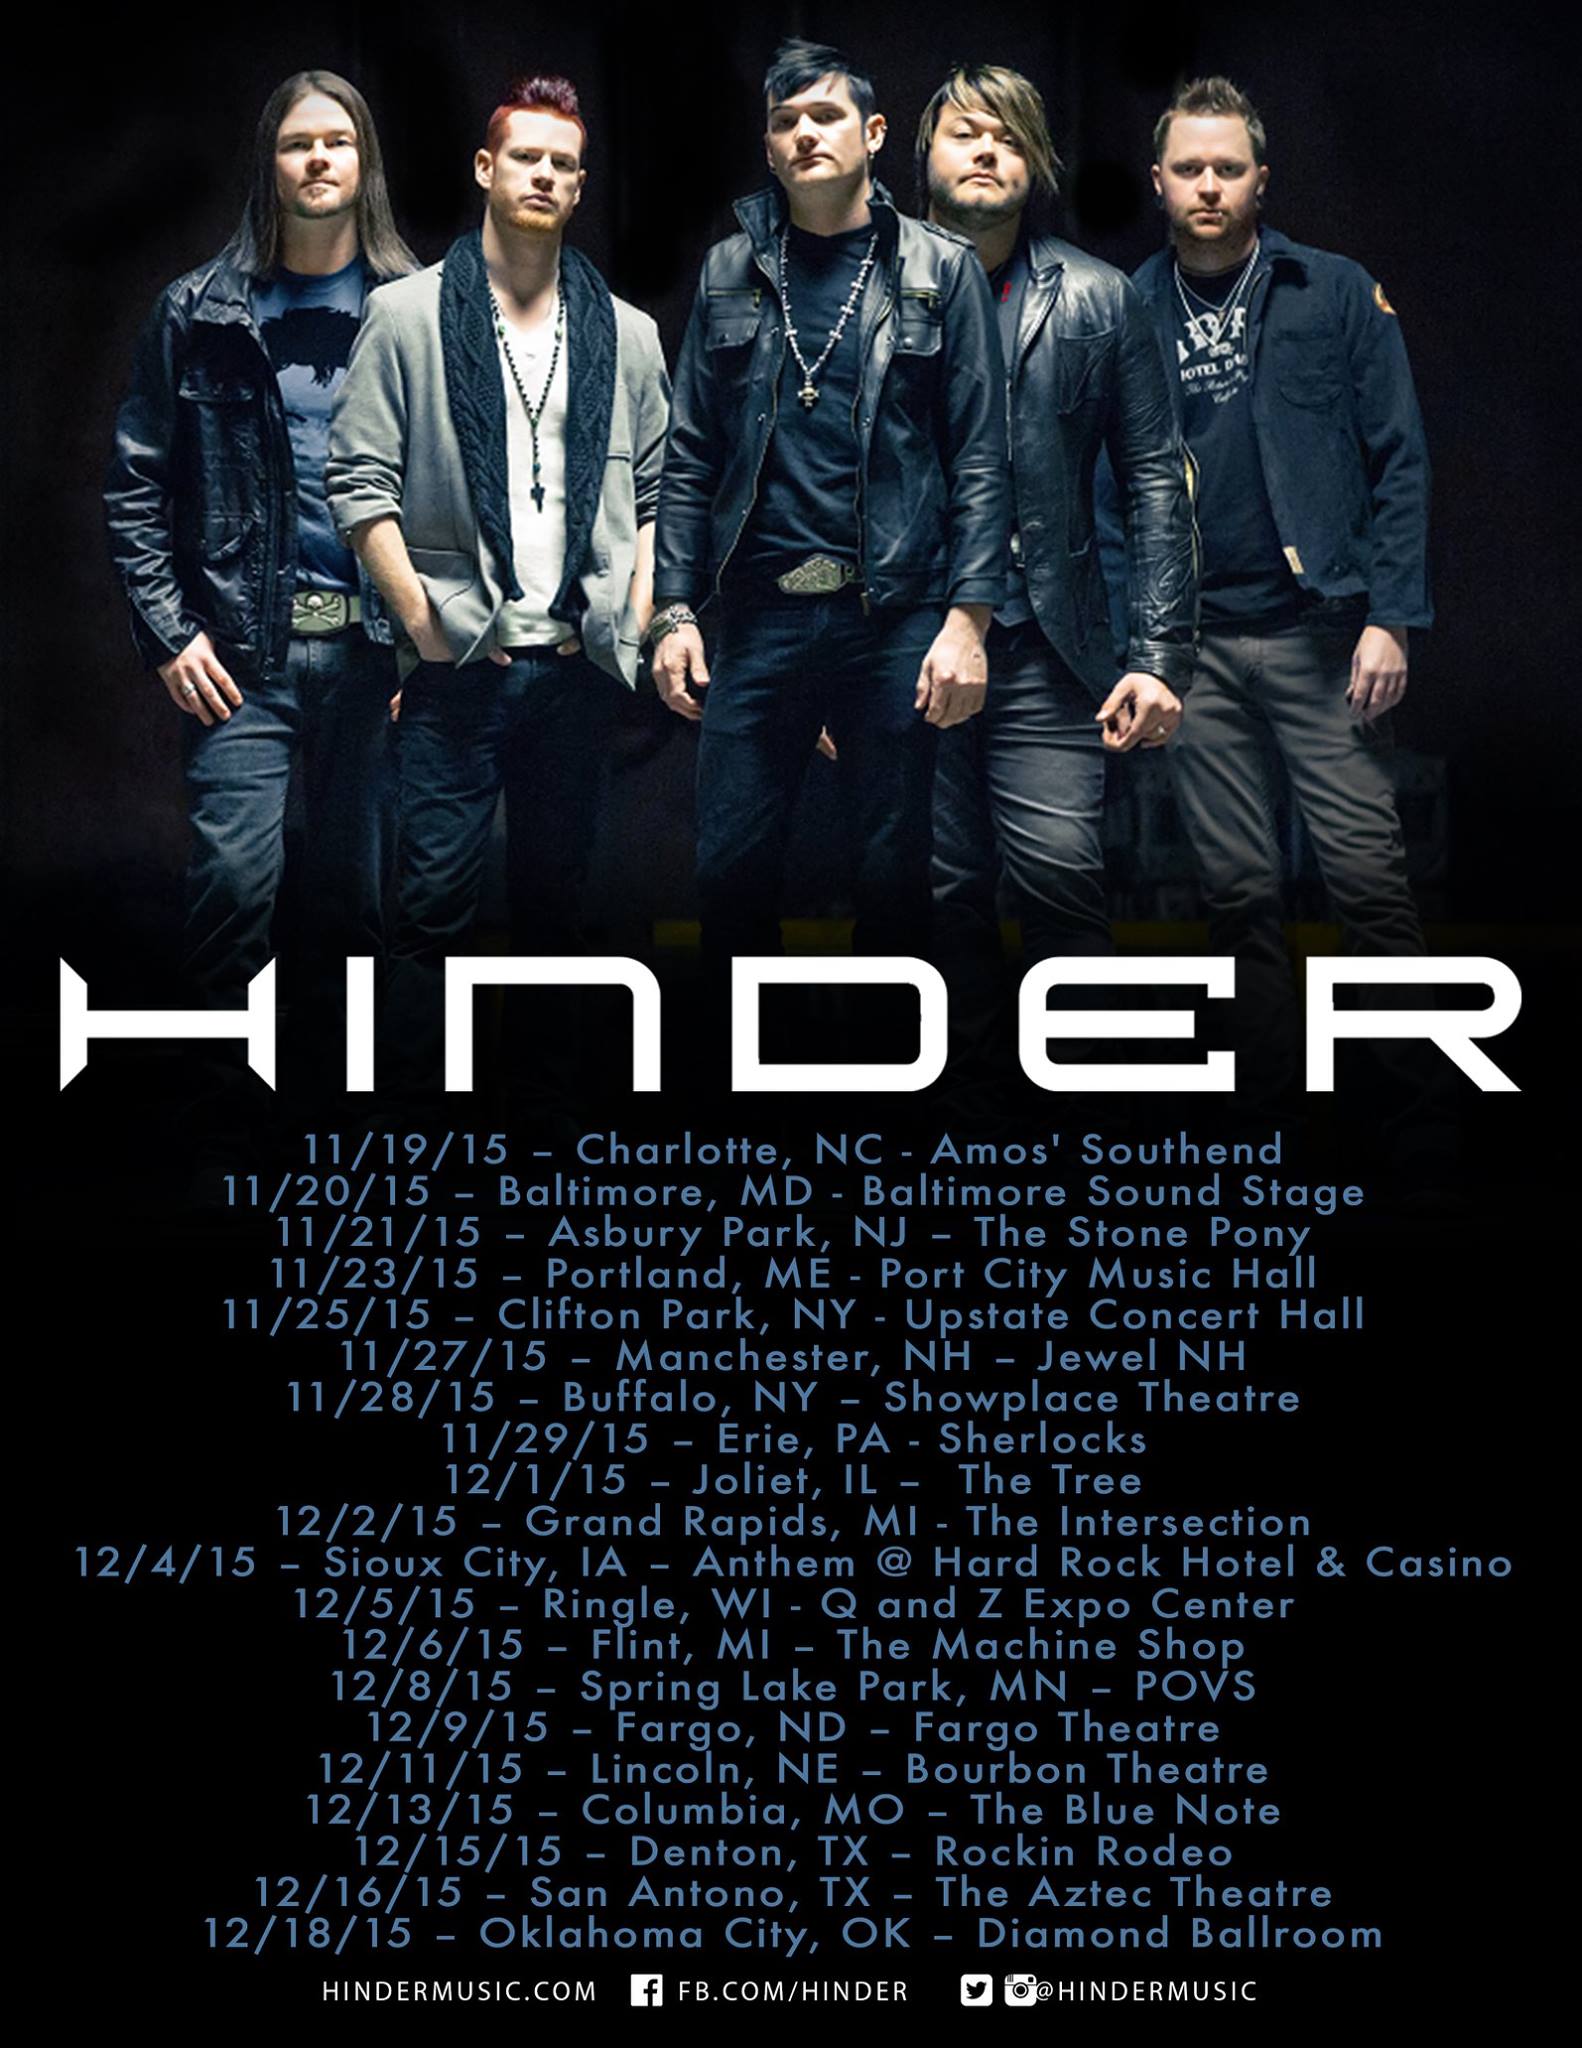 Hinder announced their Winter Tour with special guests, Saving Abel, Shaman's Harvest and Within Reason on select dates.